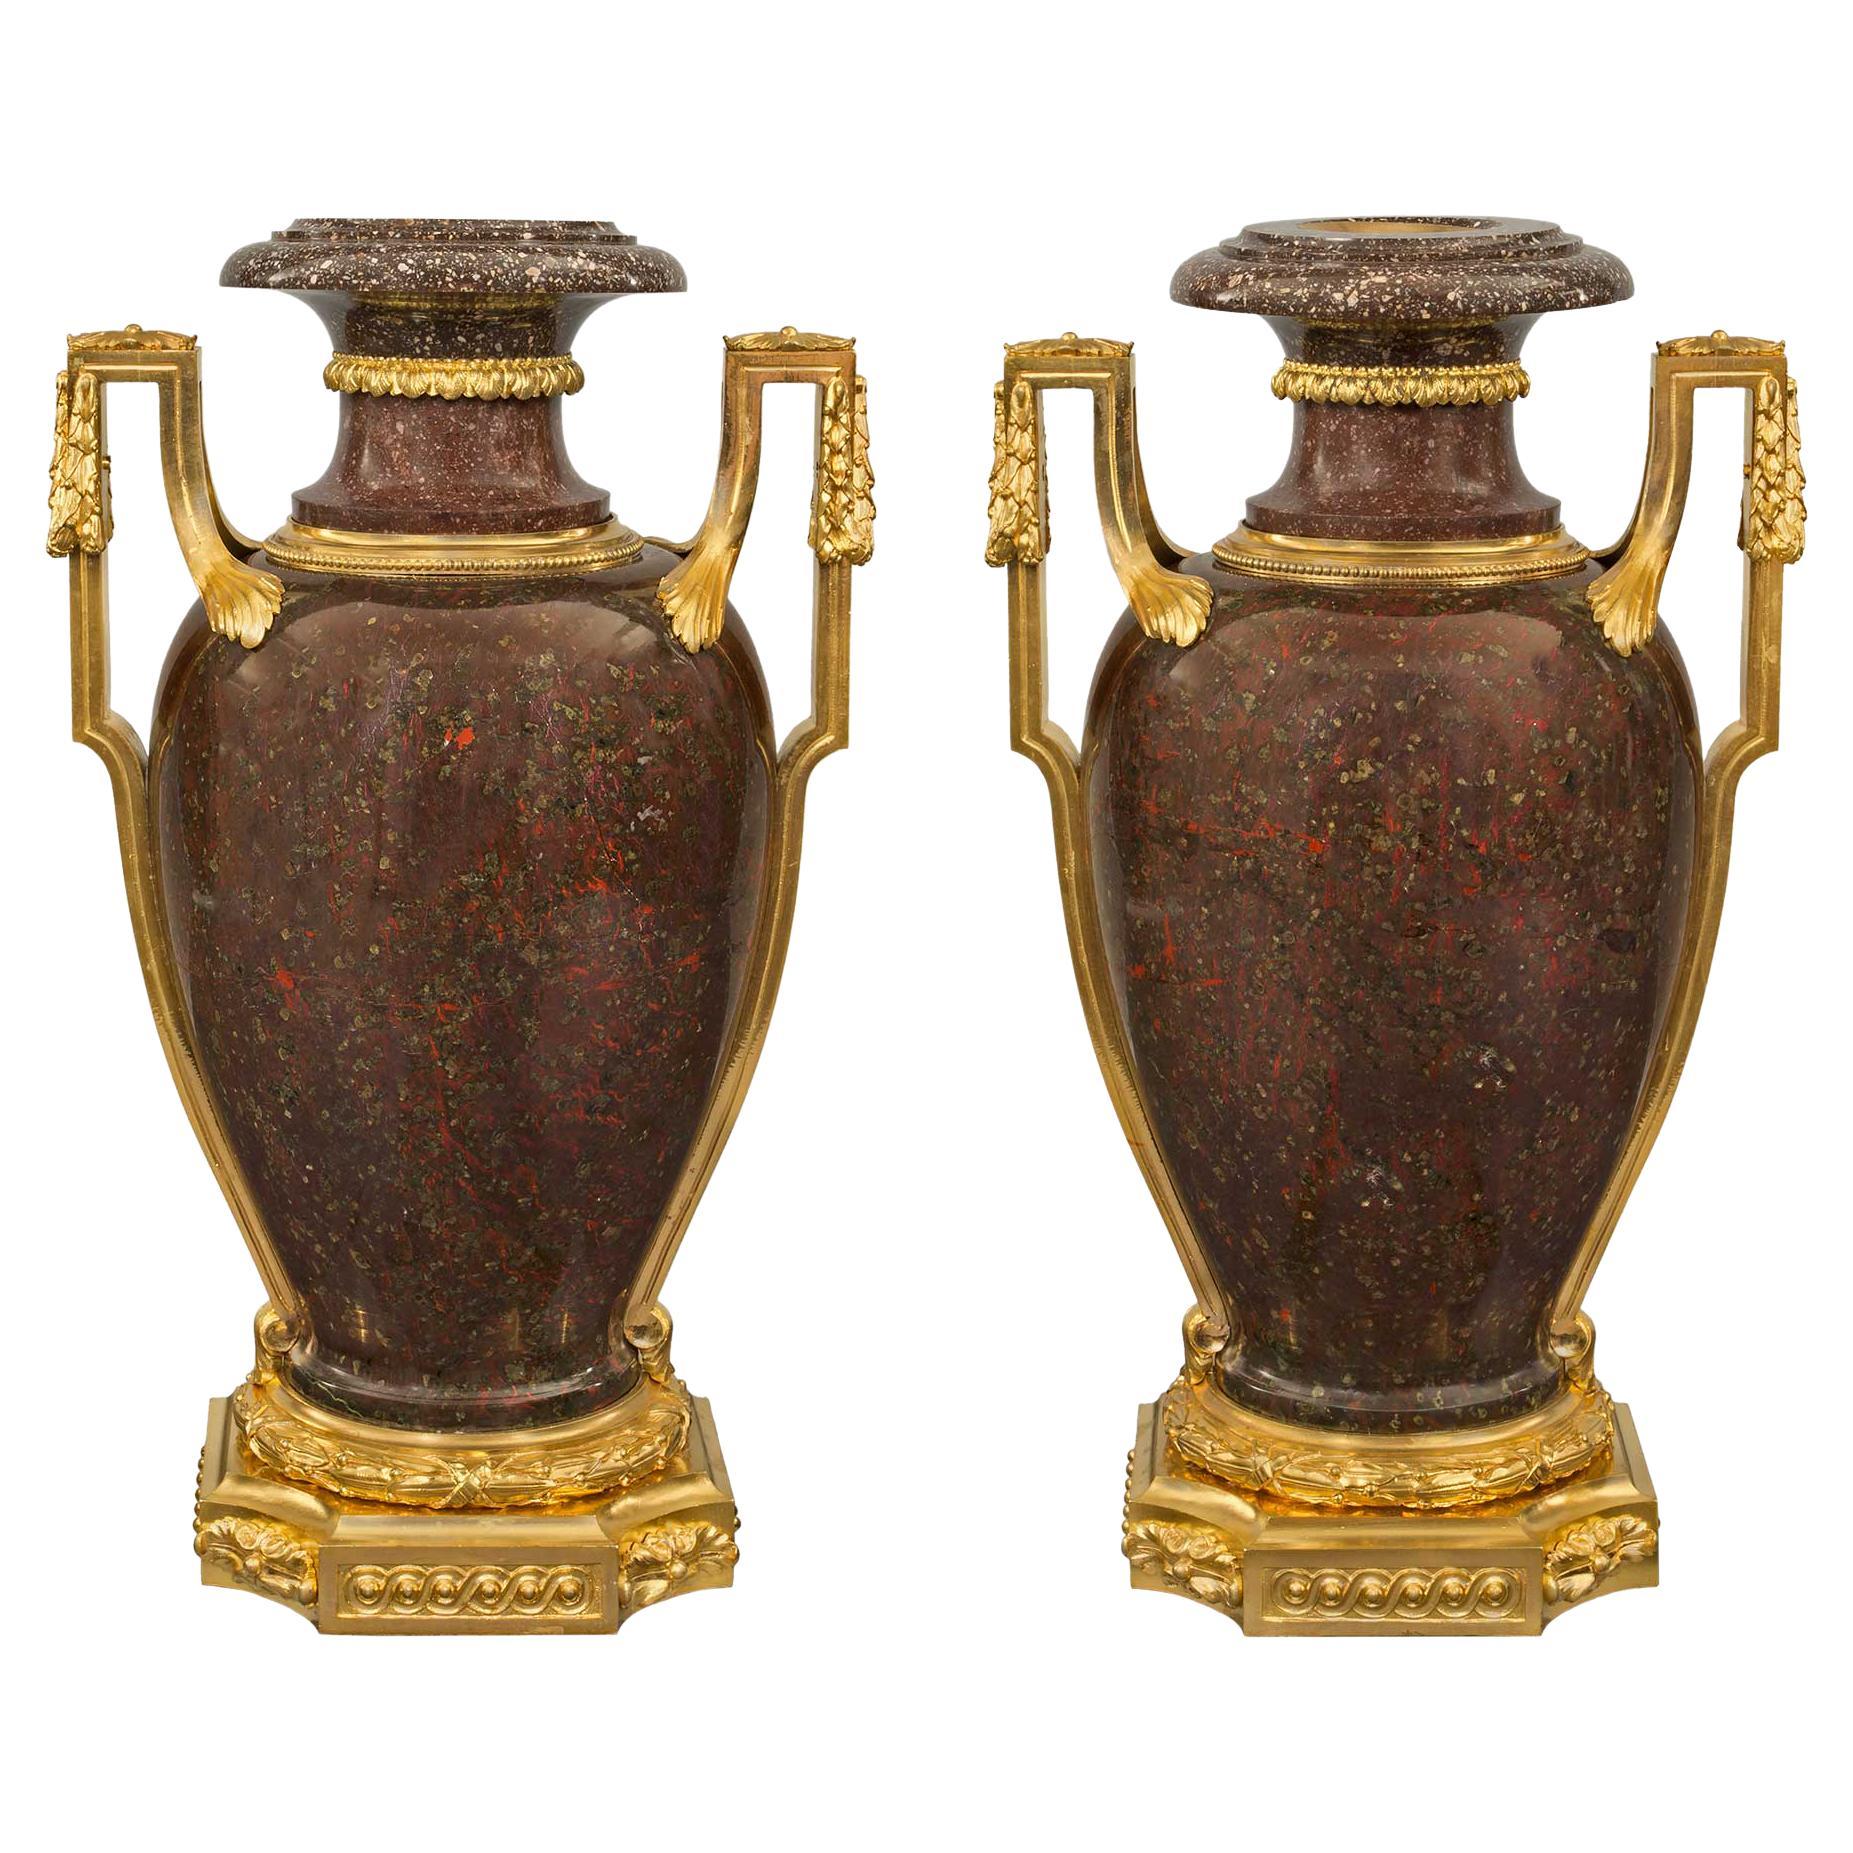 French Early 19th Century Louis XVI Style Porphyry and Ormolu Urns For Sale